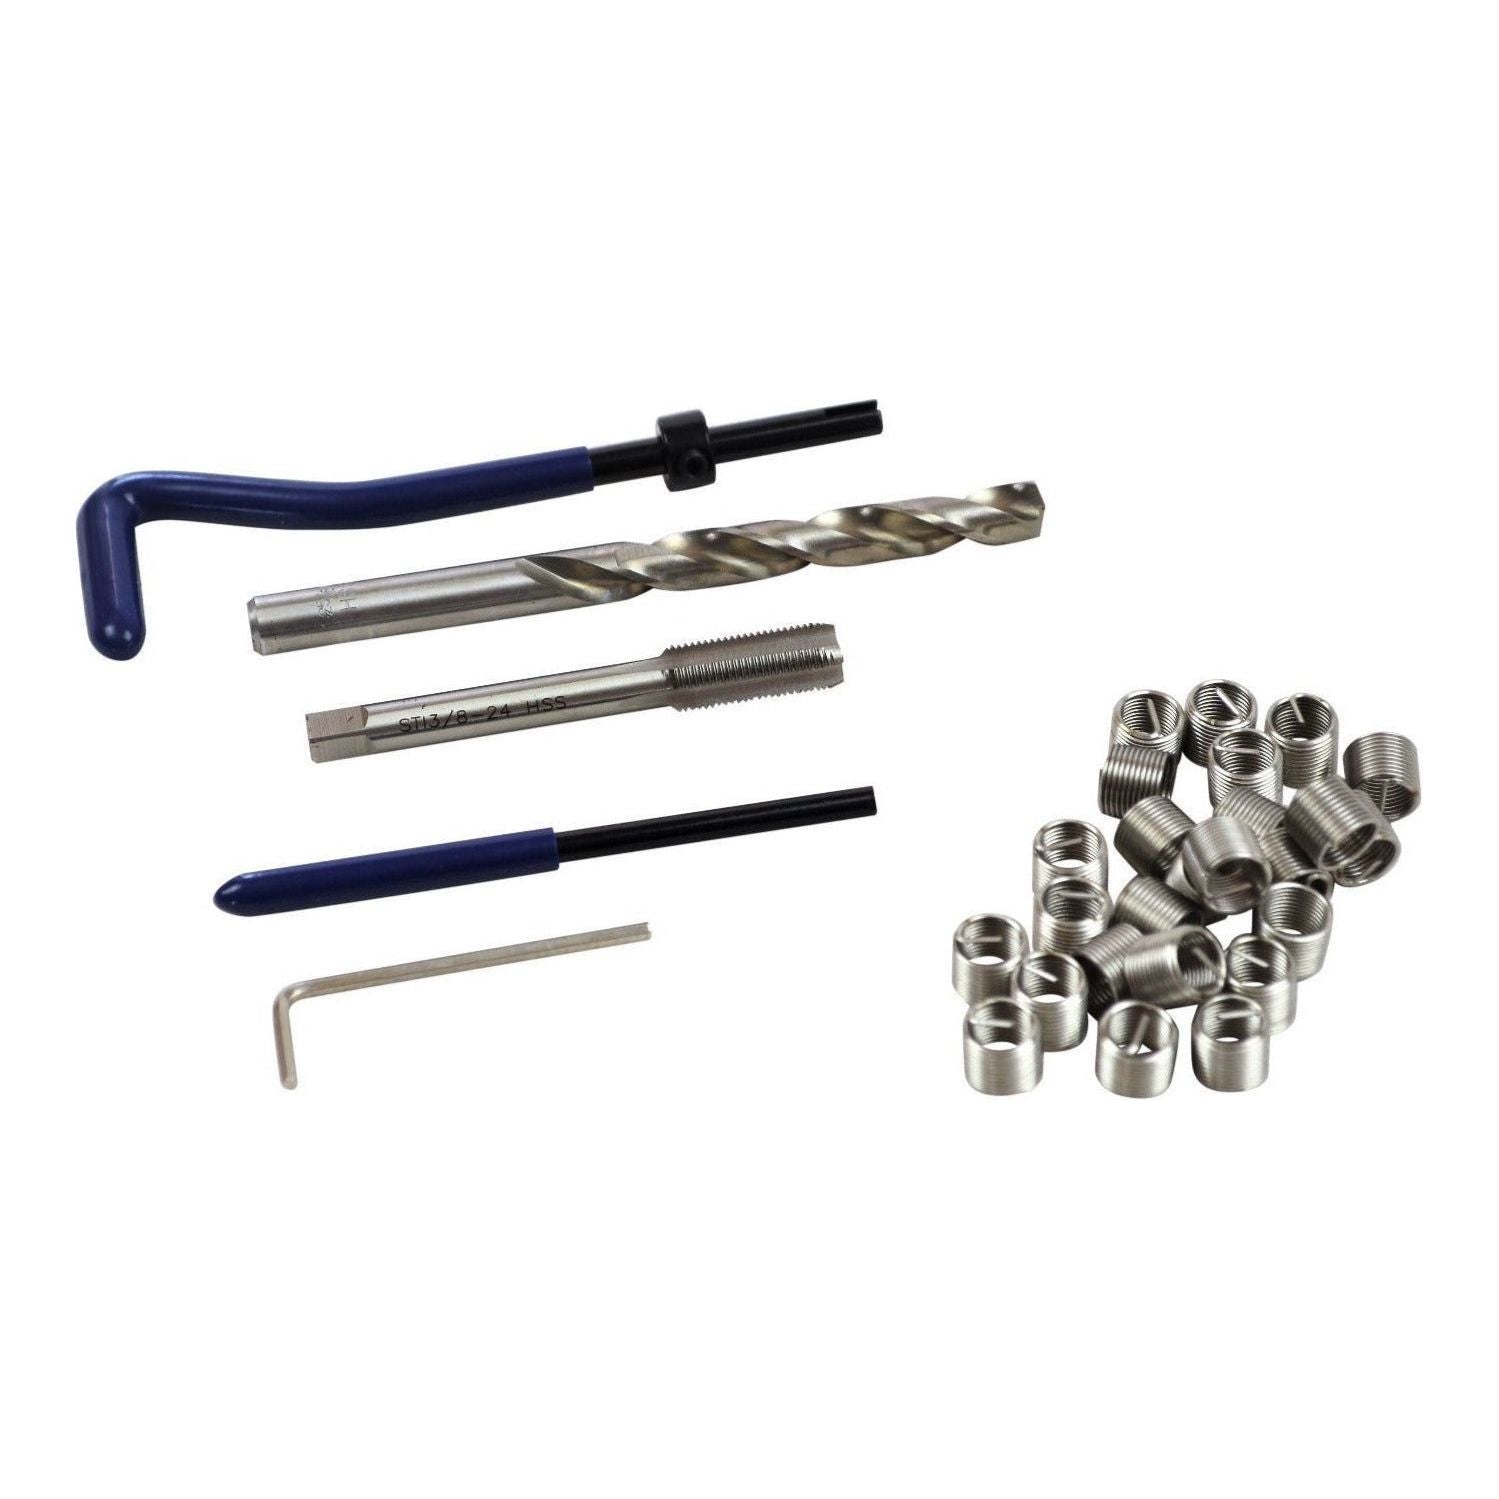 Helicoil Kit 3/8 - 24 thread Repair Insert Tap Set 31 Piece, helical kit